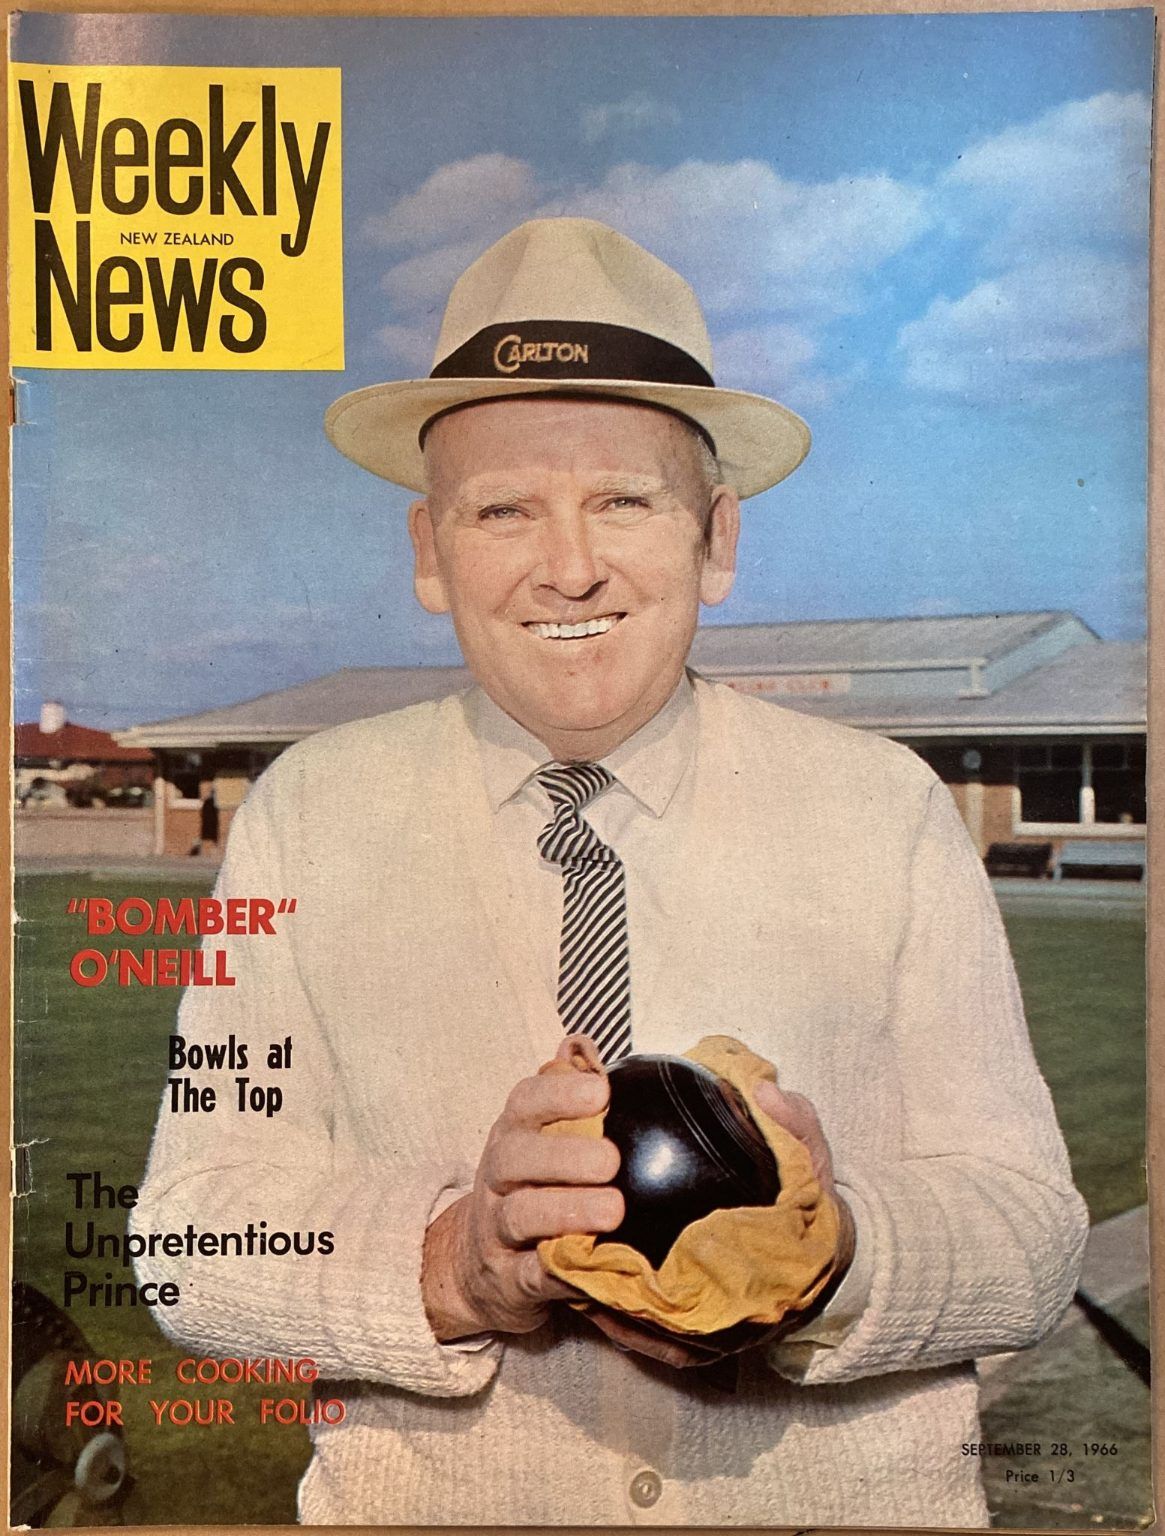 OLD NEWSPAPER: New Zealand Weekly News, No. 5366, 28 September 1966